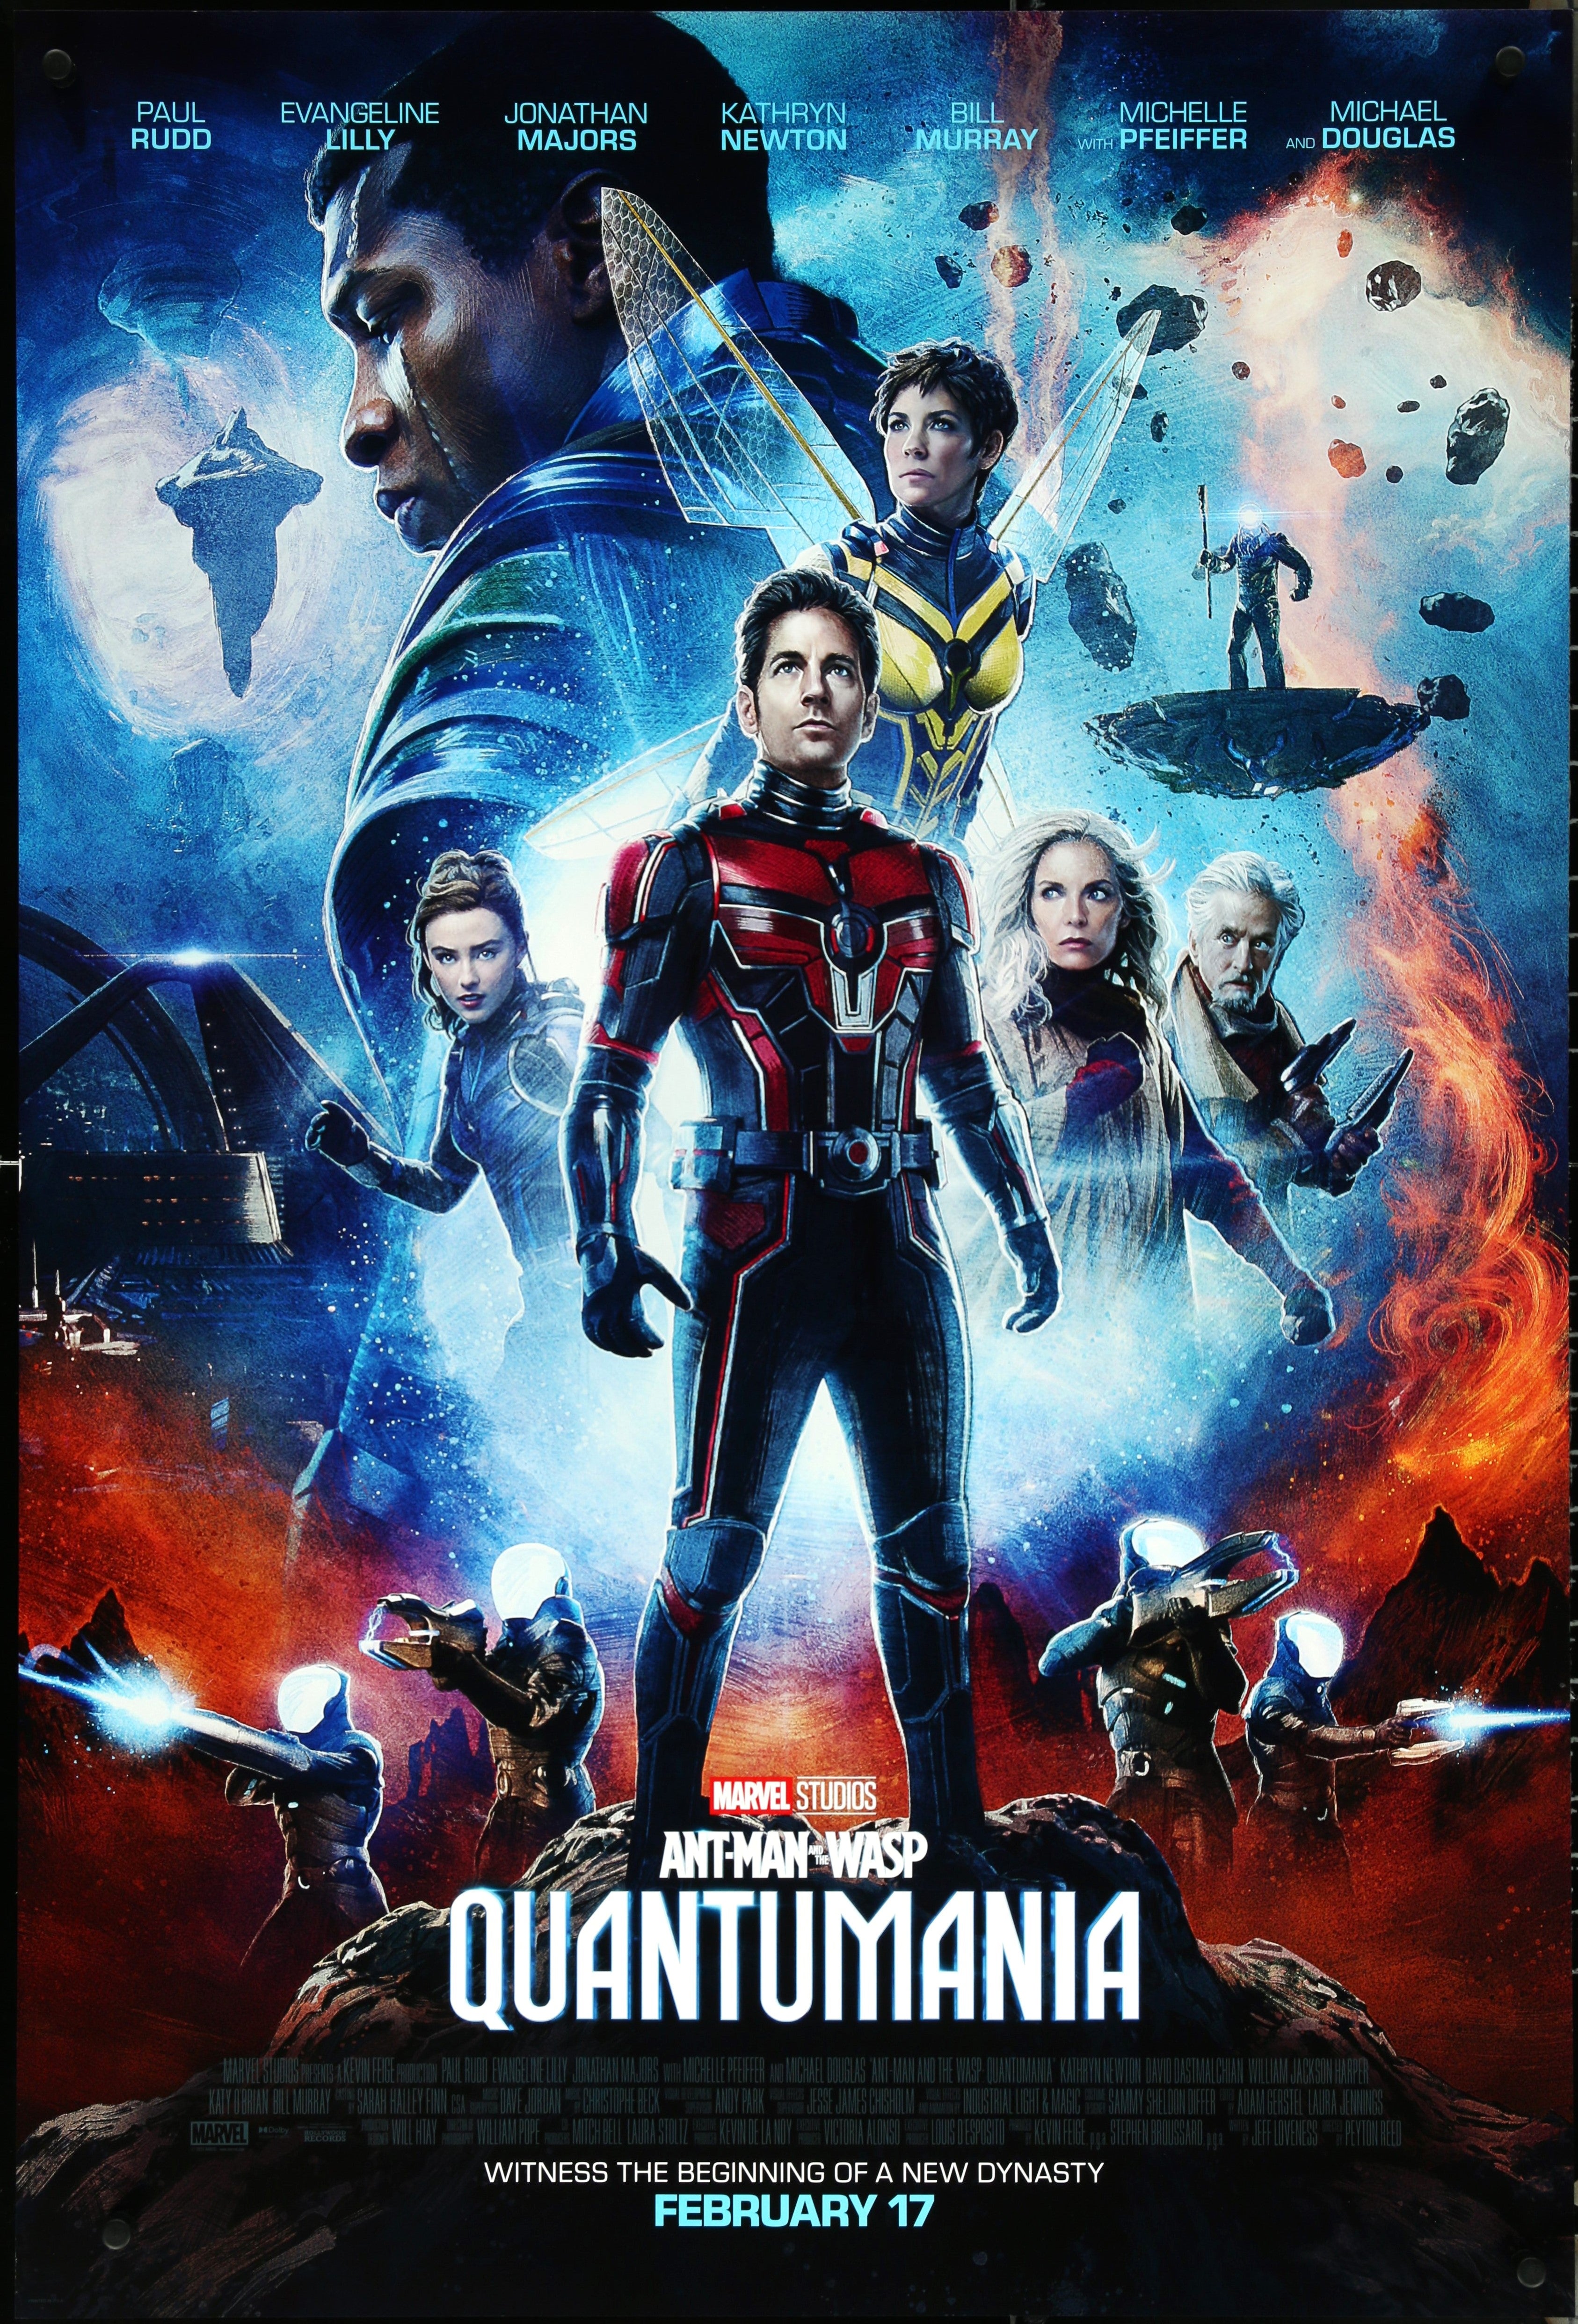 ANT-MAN & THE WASP: QUANTUMANIA (2023)